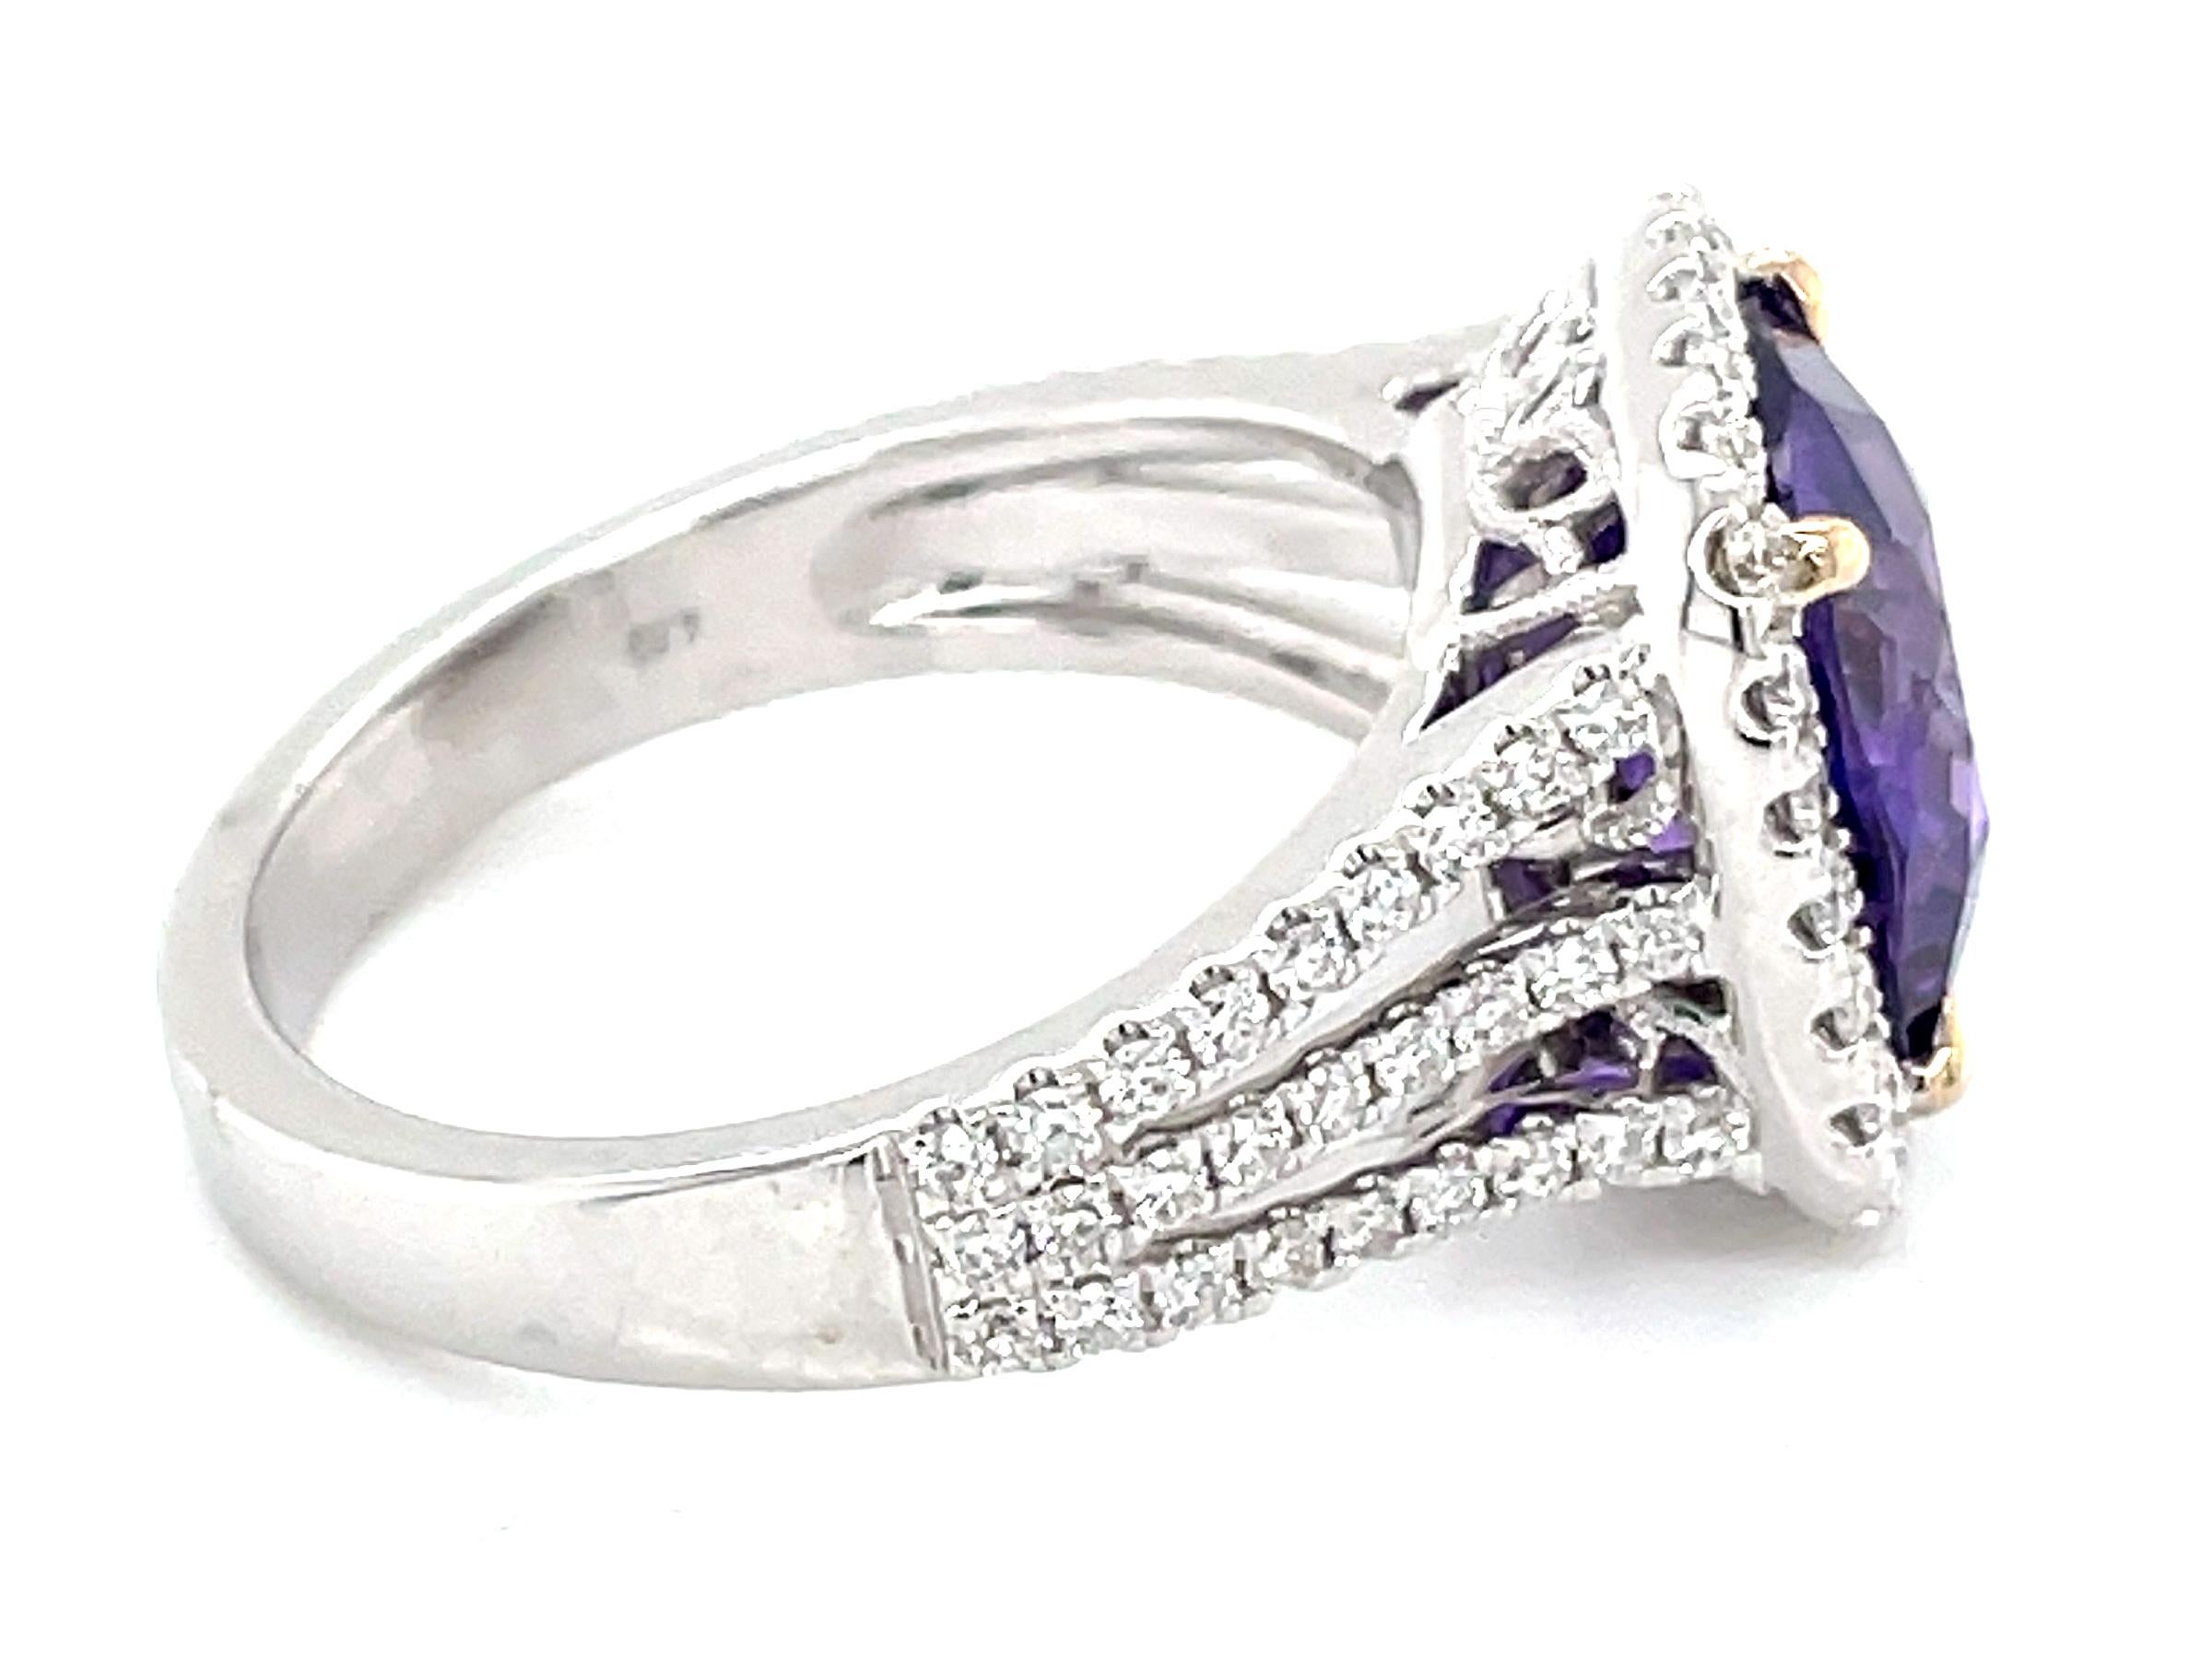 This stunning cocktail ring showcases a beautiful GAL Certified Natural No Heat 4.59 Carat Cushion Purple Sapphire with a Diamond Halo. This stunning sapphire sits on a triple diamond shank and the ring is set in 18k white gold with yellow gold